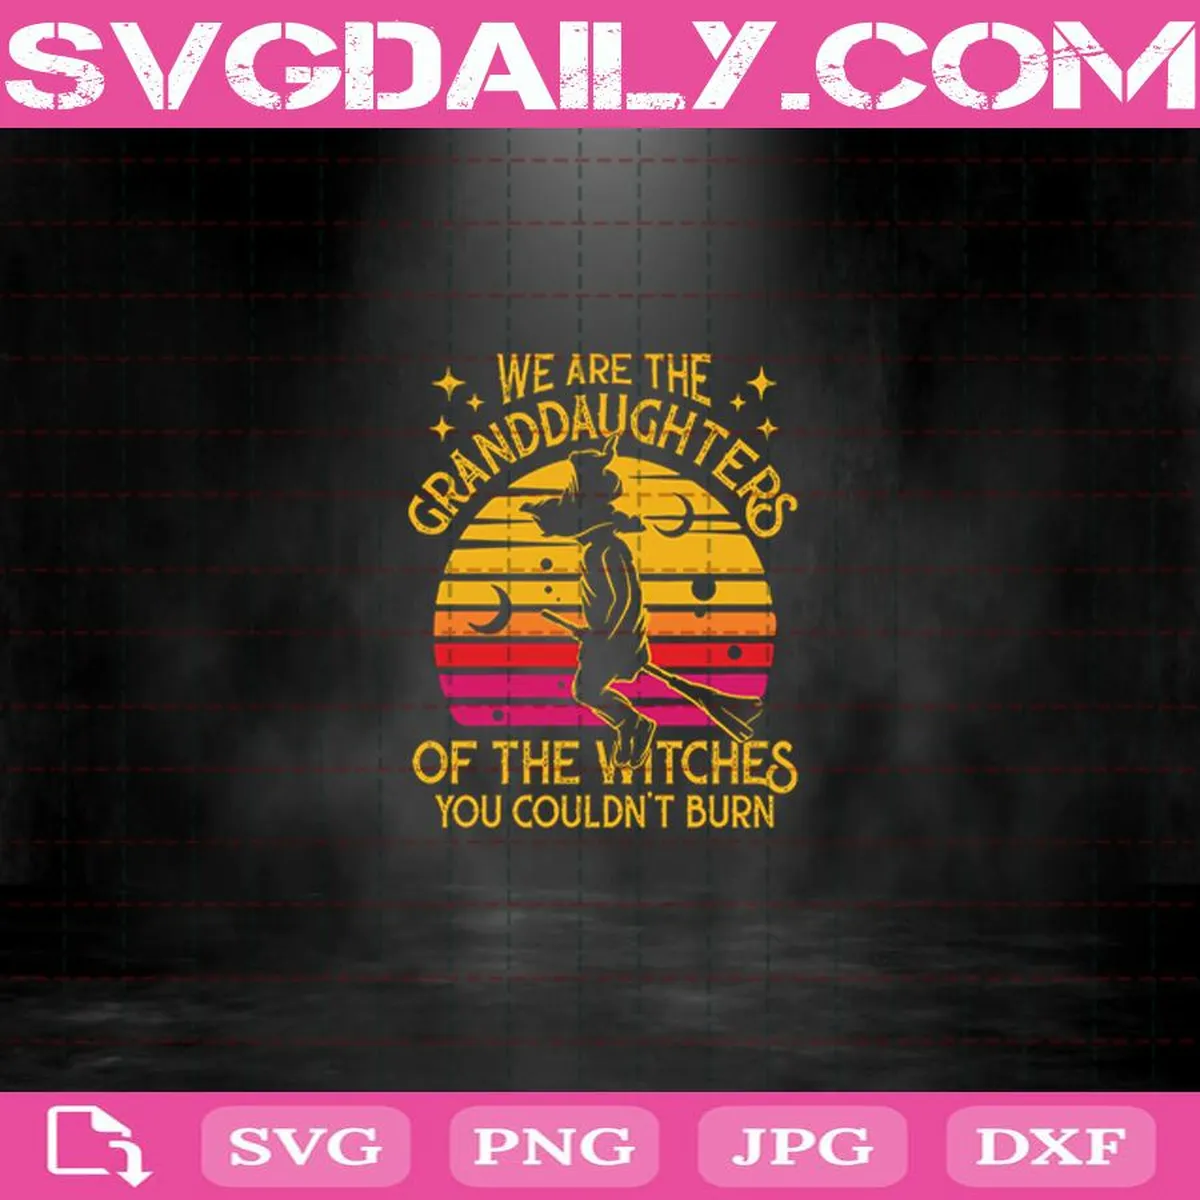 We Are The Granddaughters Of The Witches You Couldn’t Burn Svg, Vintage Witch Halloween Svg, Witch Svg